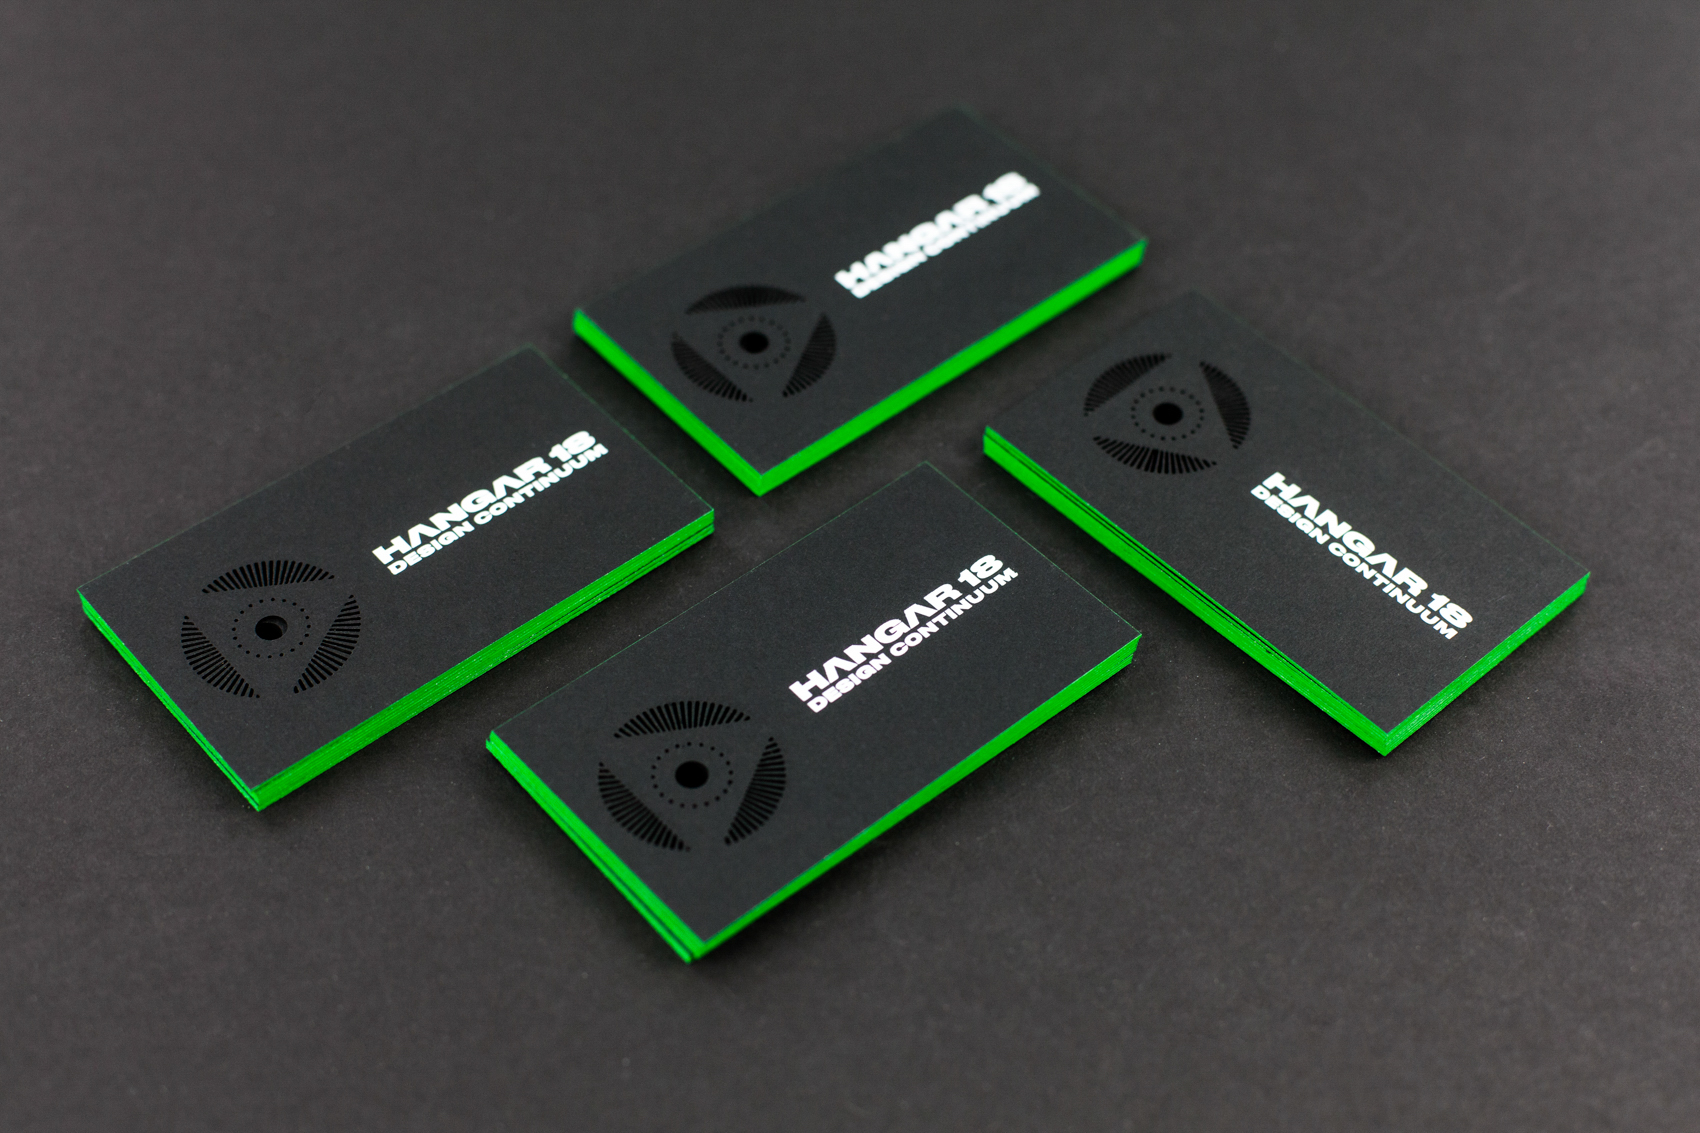 As part of a brand refresh in 2017, we created a new business card that pushed the boundaries in detailed laser die-cutting by using a very thick black stock